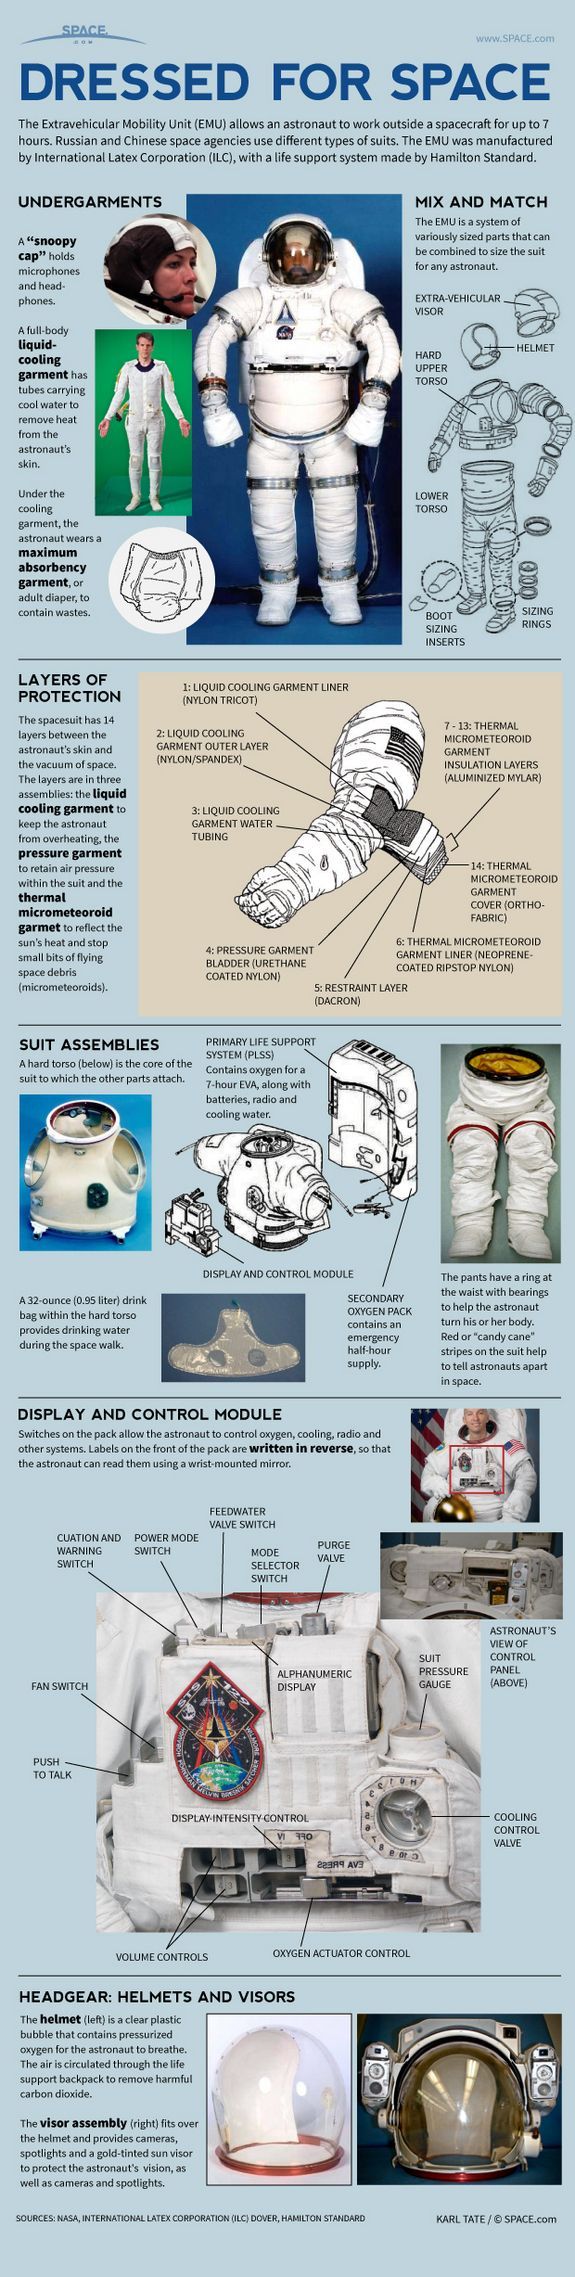 How NASA Spacesuits Work: EMUs Explained #Infographic